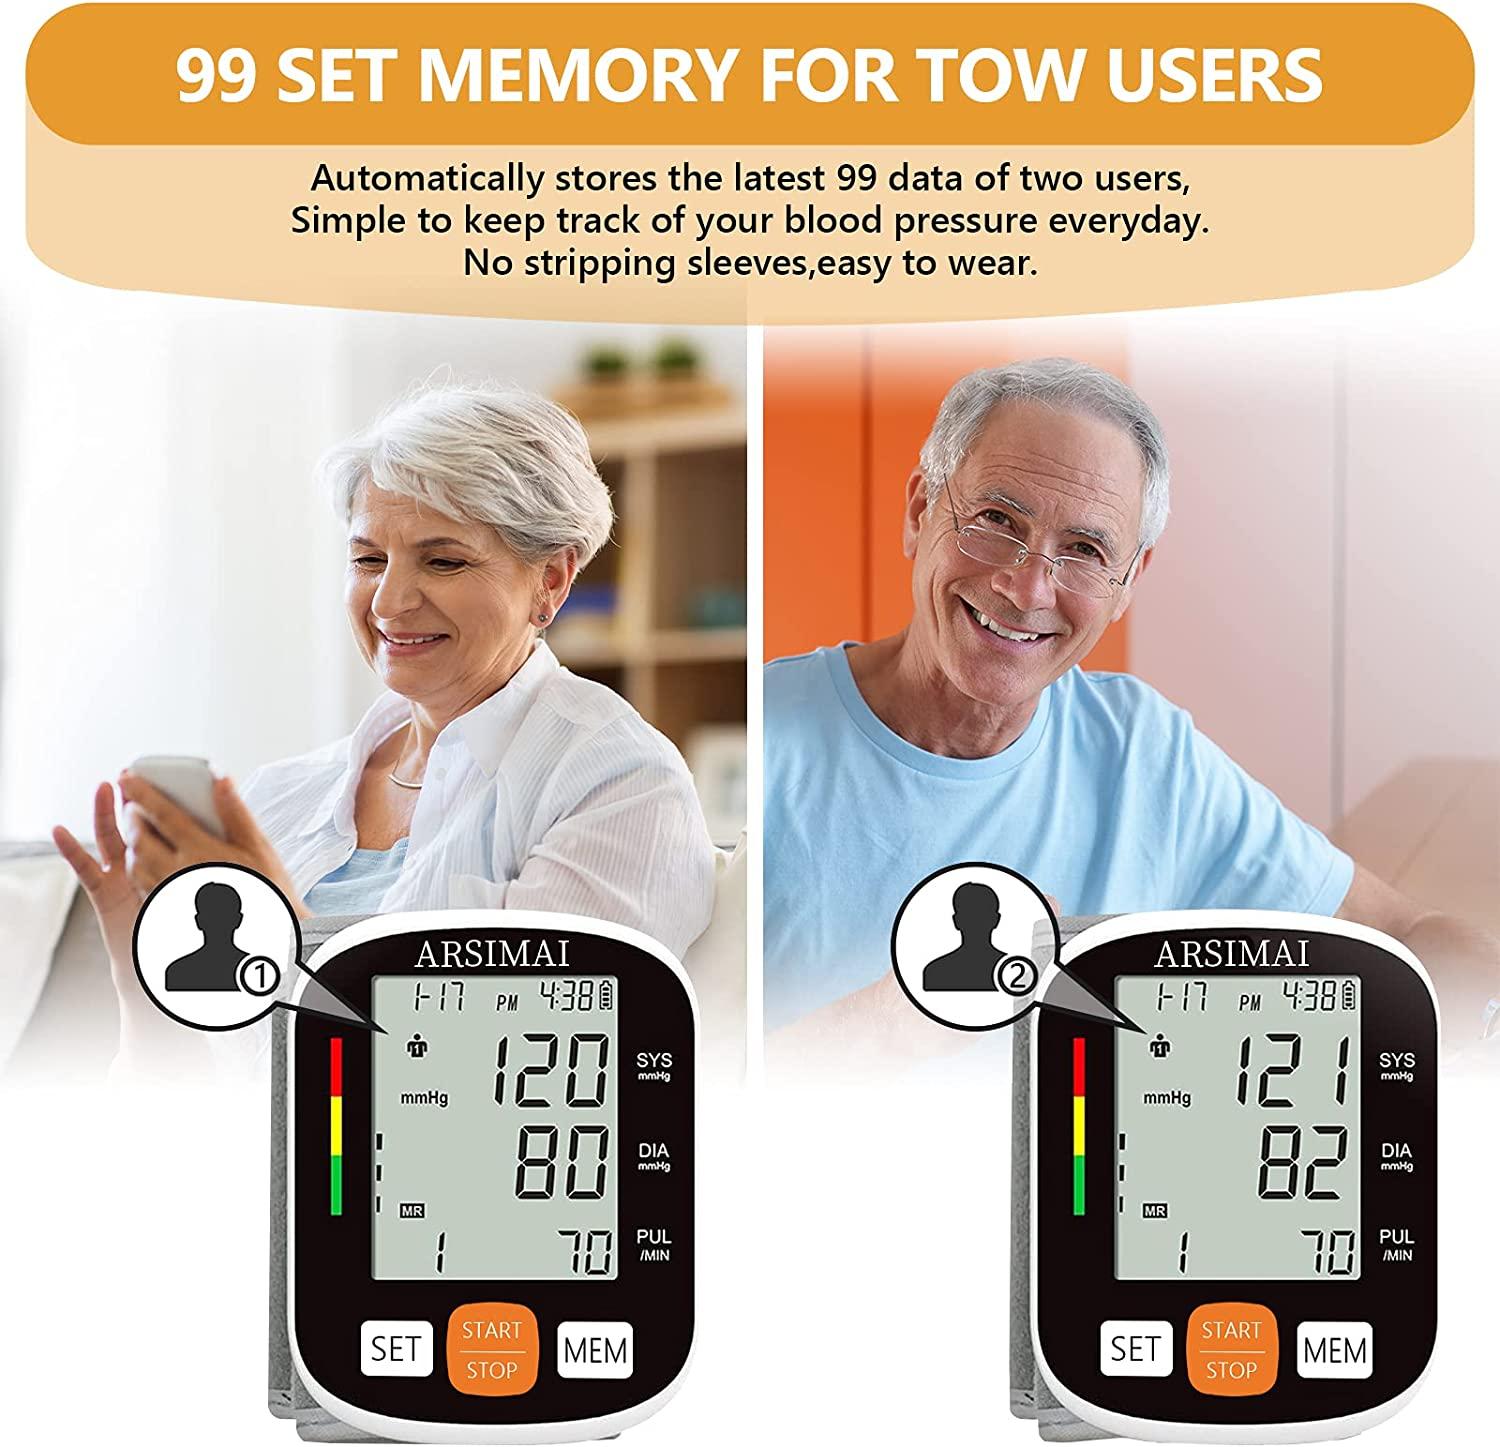 Aoibox Automatic Blood Pressure Monitor Wrist BP Monitor with Large LCD Display, Adjustable Wrist Cuff, 99x2 Sets Memory